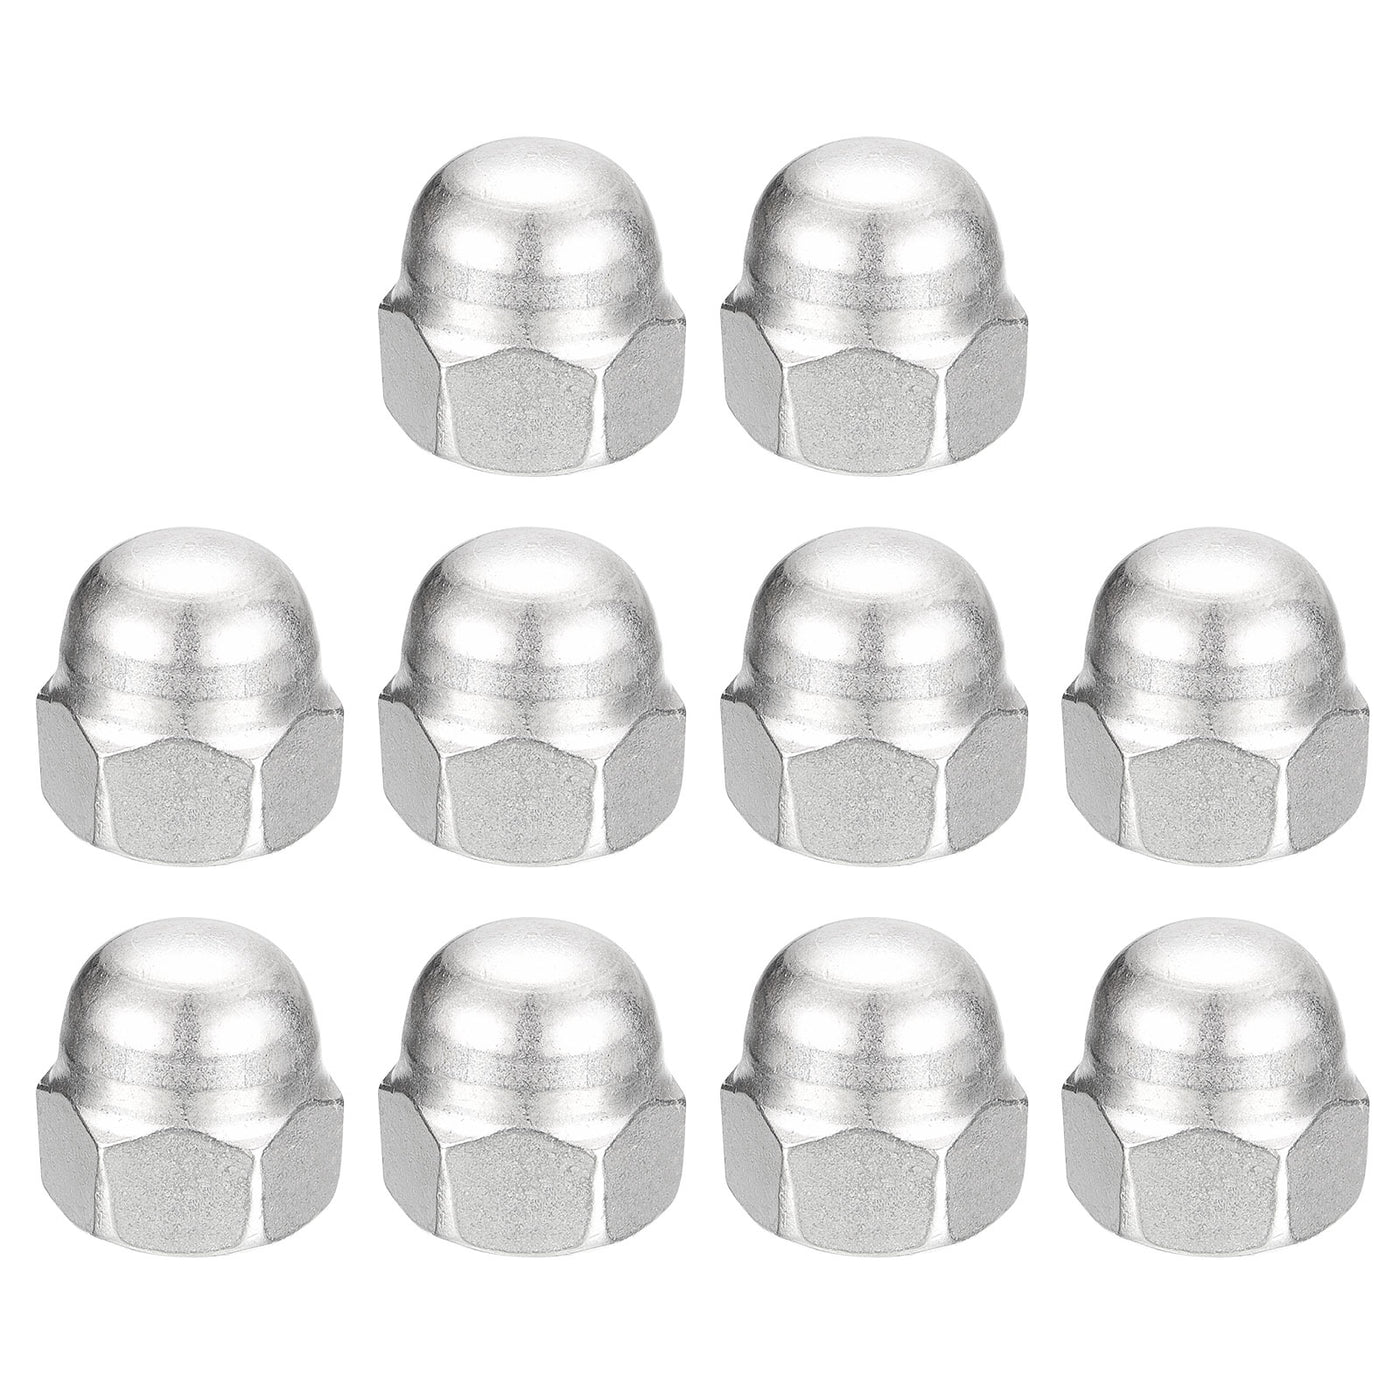 uxcell Uxcell 1/2-13 Acorn Cap Nuts,10pcs - 304 Stainless Steel Hardware Nuts, Acorn Hex Cap Dome Head Nuts for Fasteners (Silver)